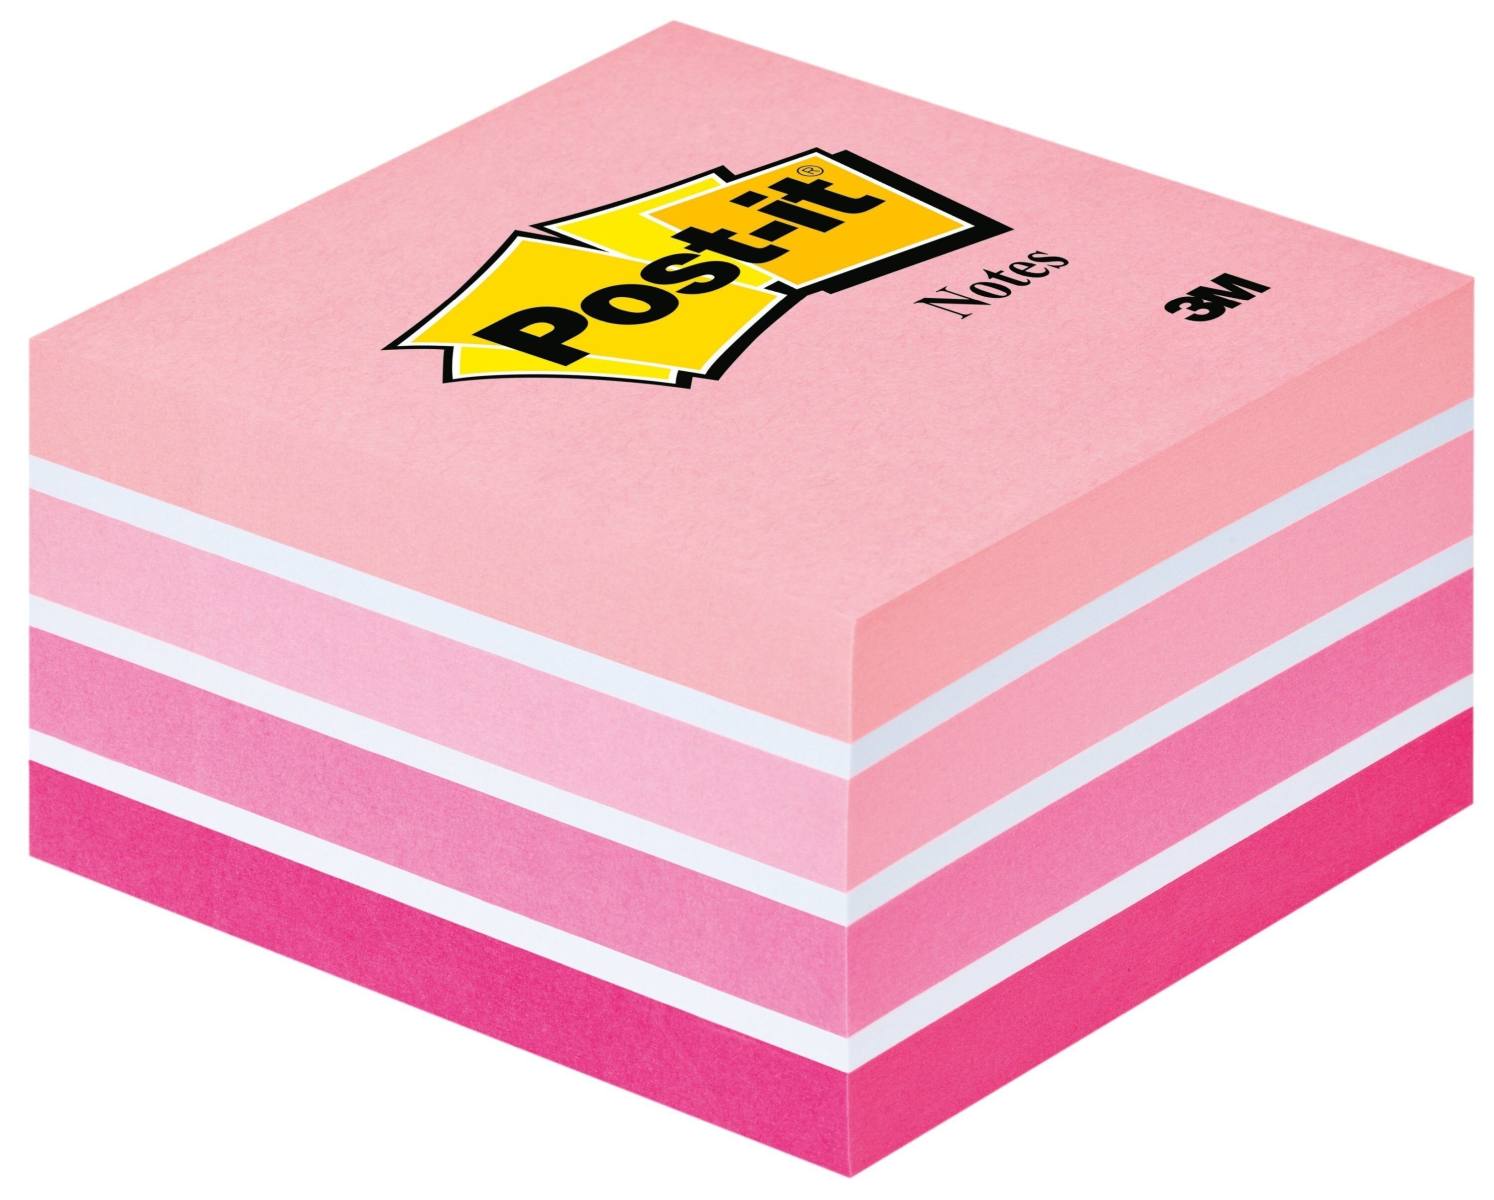 3M Post-it Cube 2028P, 76 mm x 76 mm, pastel pink colours, 1 cube of 450 sheets